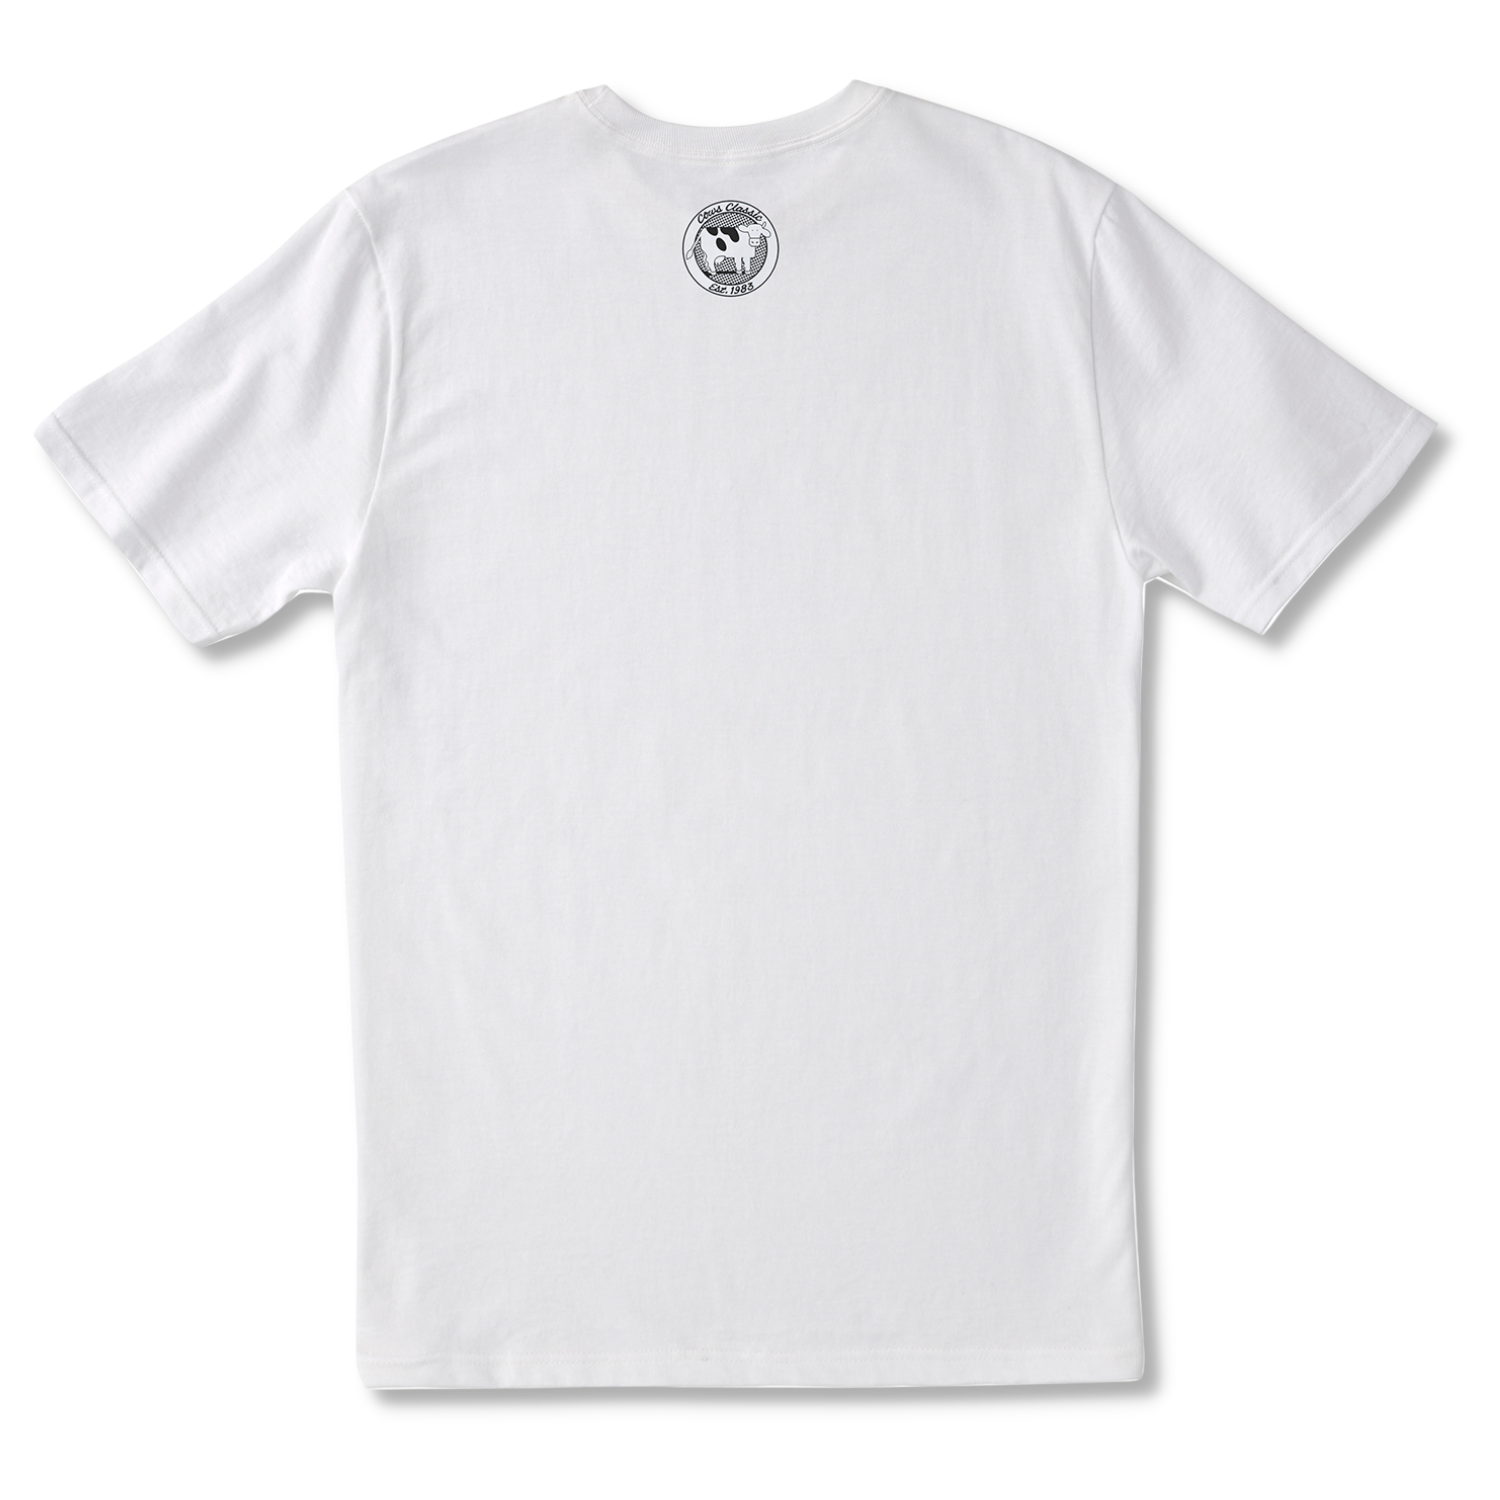 COW MacLeod COWS Classic T